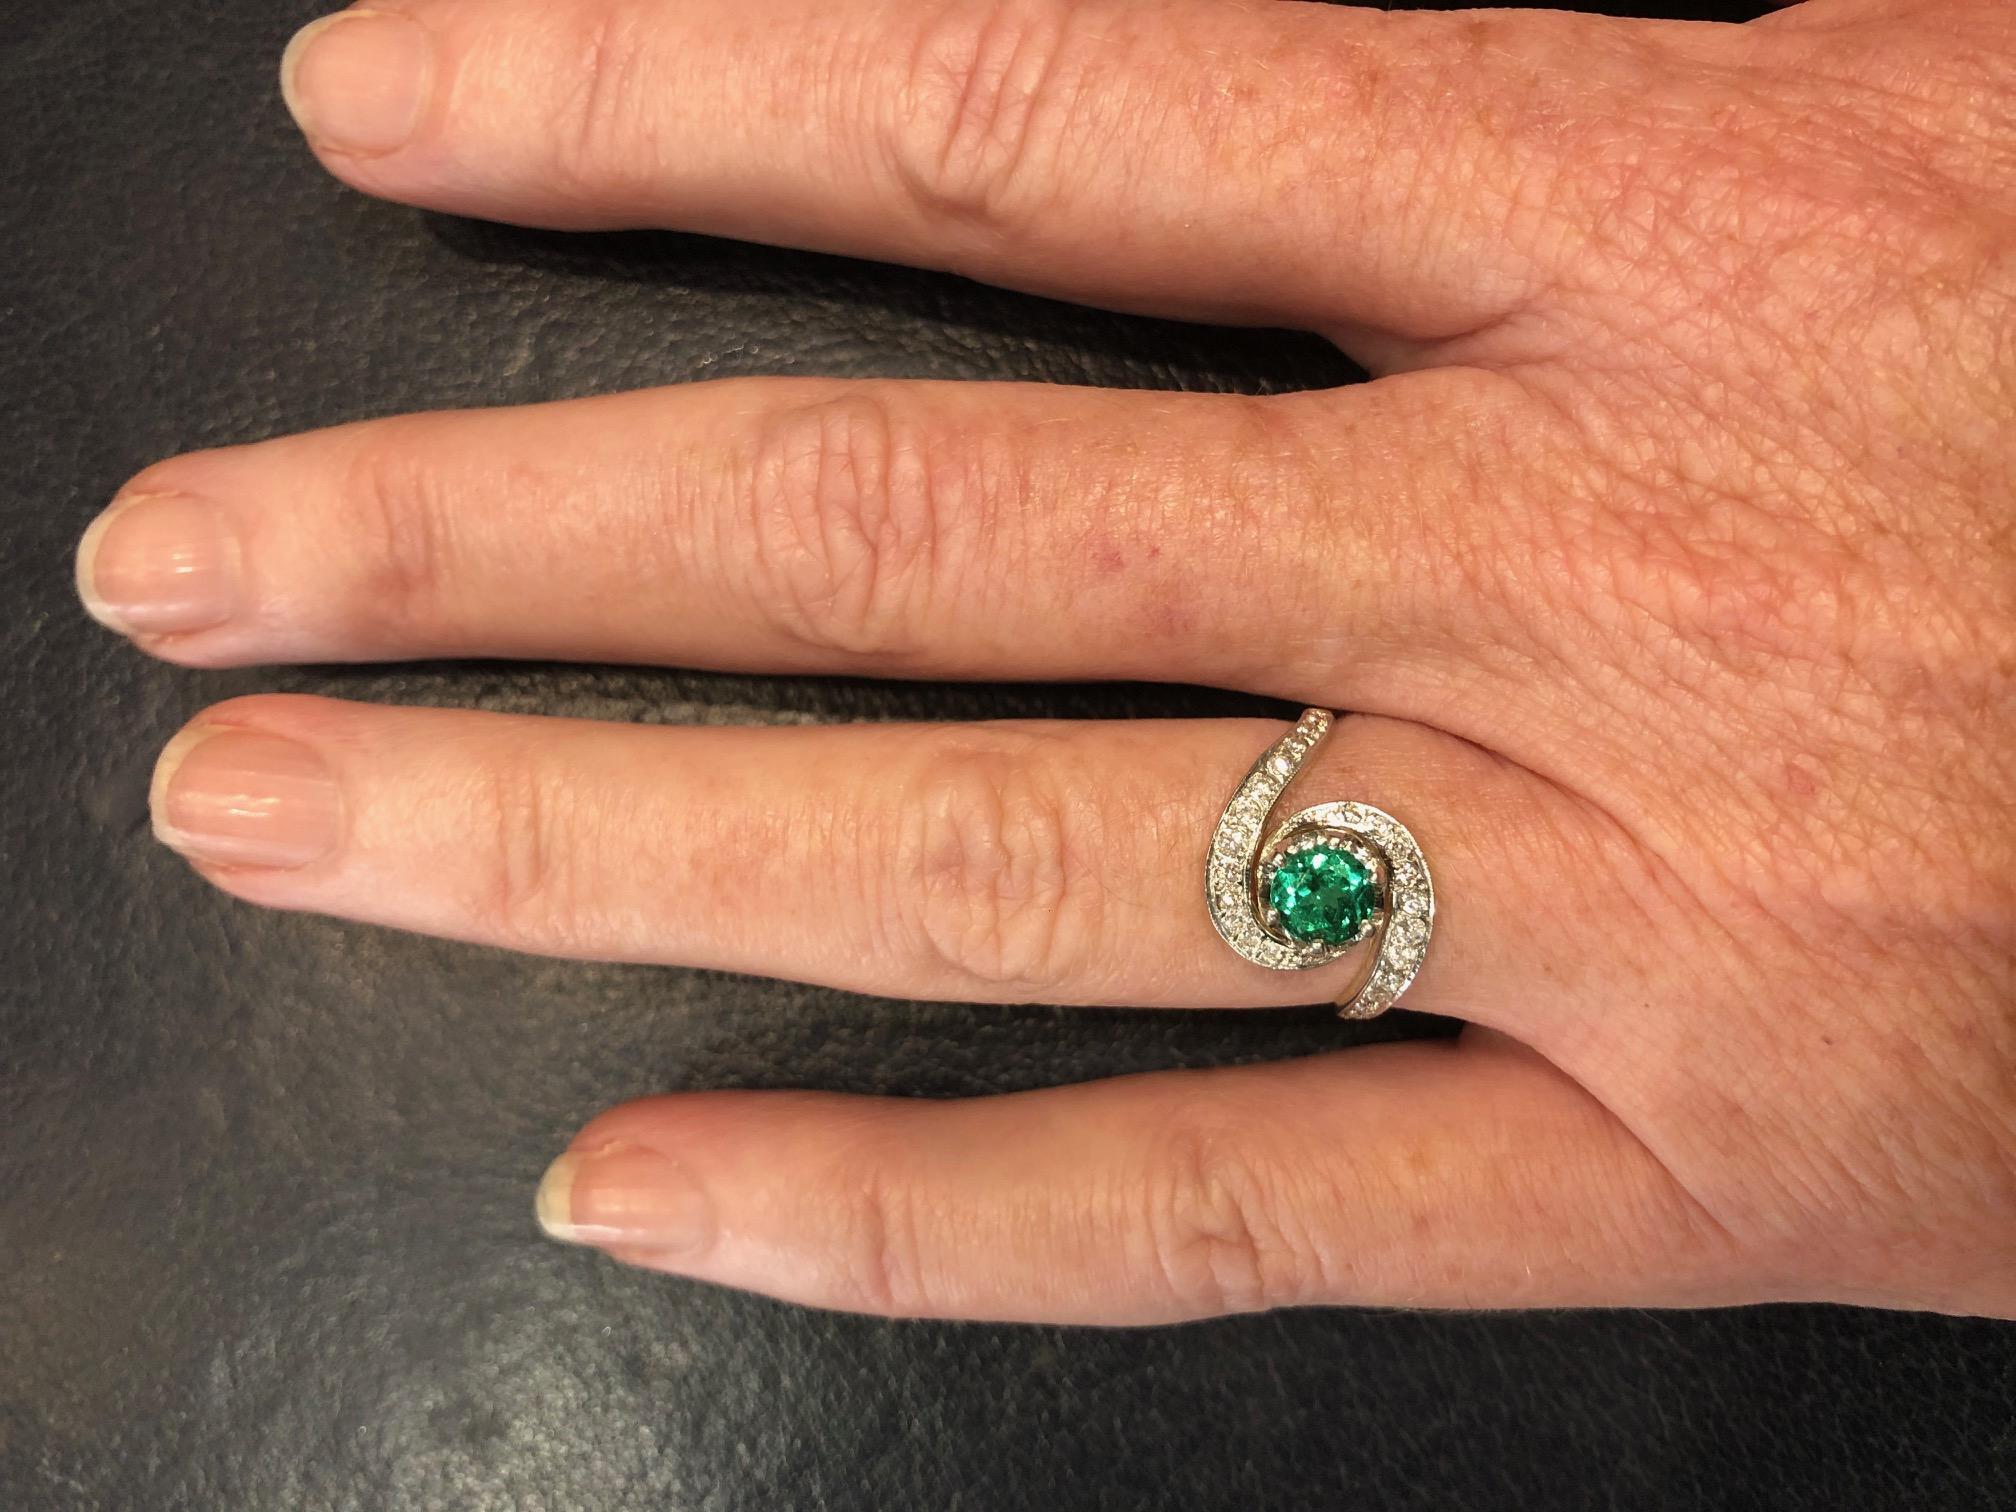 Emerald and Diamond Ring in 18ct White Gold and Yellow Gold, centre round Emerald 0.67ct and 24 brilliant cut diamonds totalling 0.30ct HSI2
Ring size M or 6.25 US - can be resized